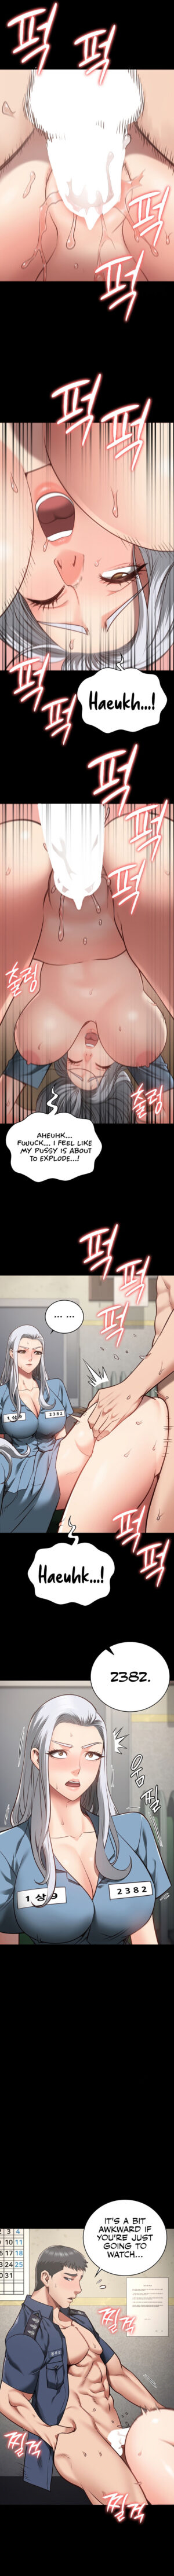 [Sung Min & In Jak] Locked Up (1-28) [English] [Omega Scans] [Ongoing]